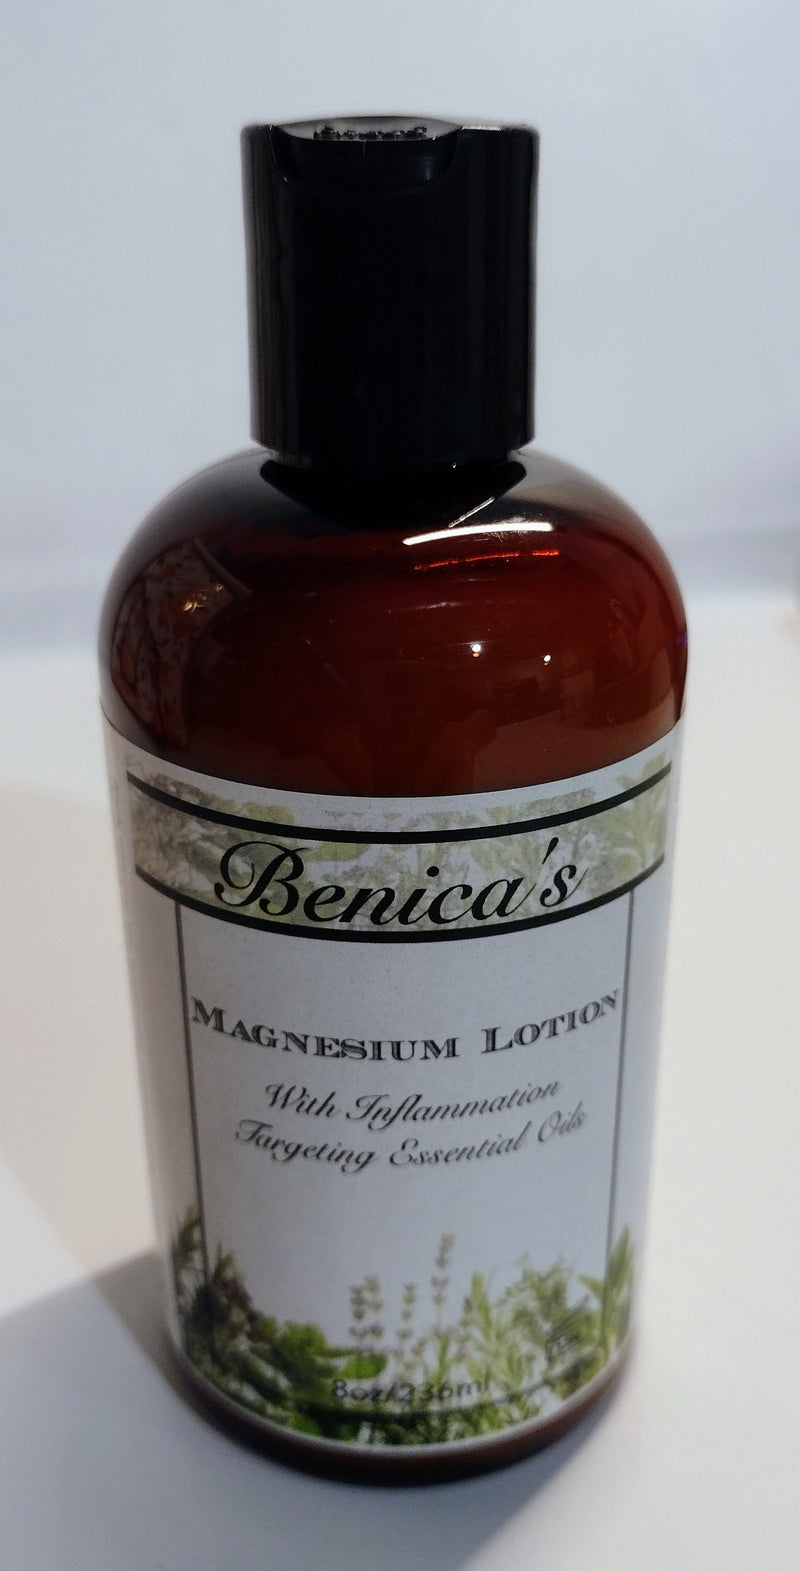 Benica's Magnesium Lotion w/ Inflammation Targeting Essential Oils